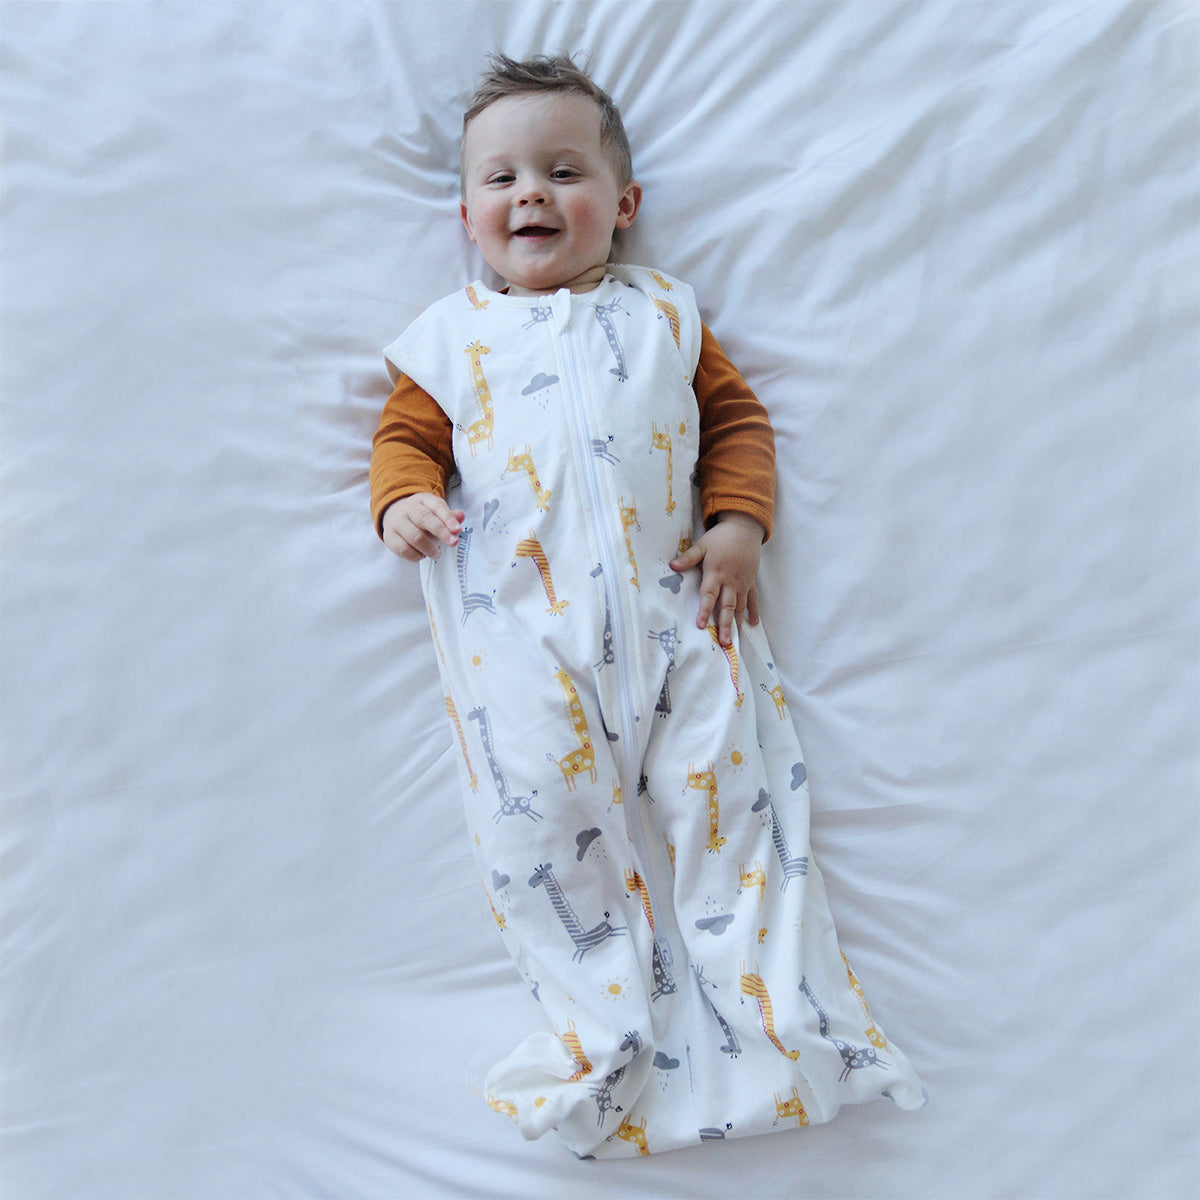 Snuggletime Quilted Cotton Sleep Sack